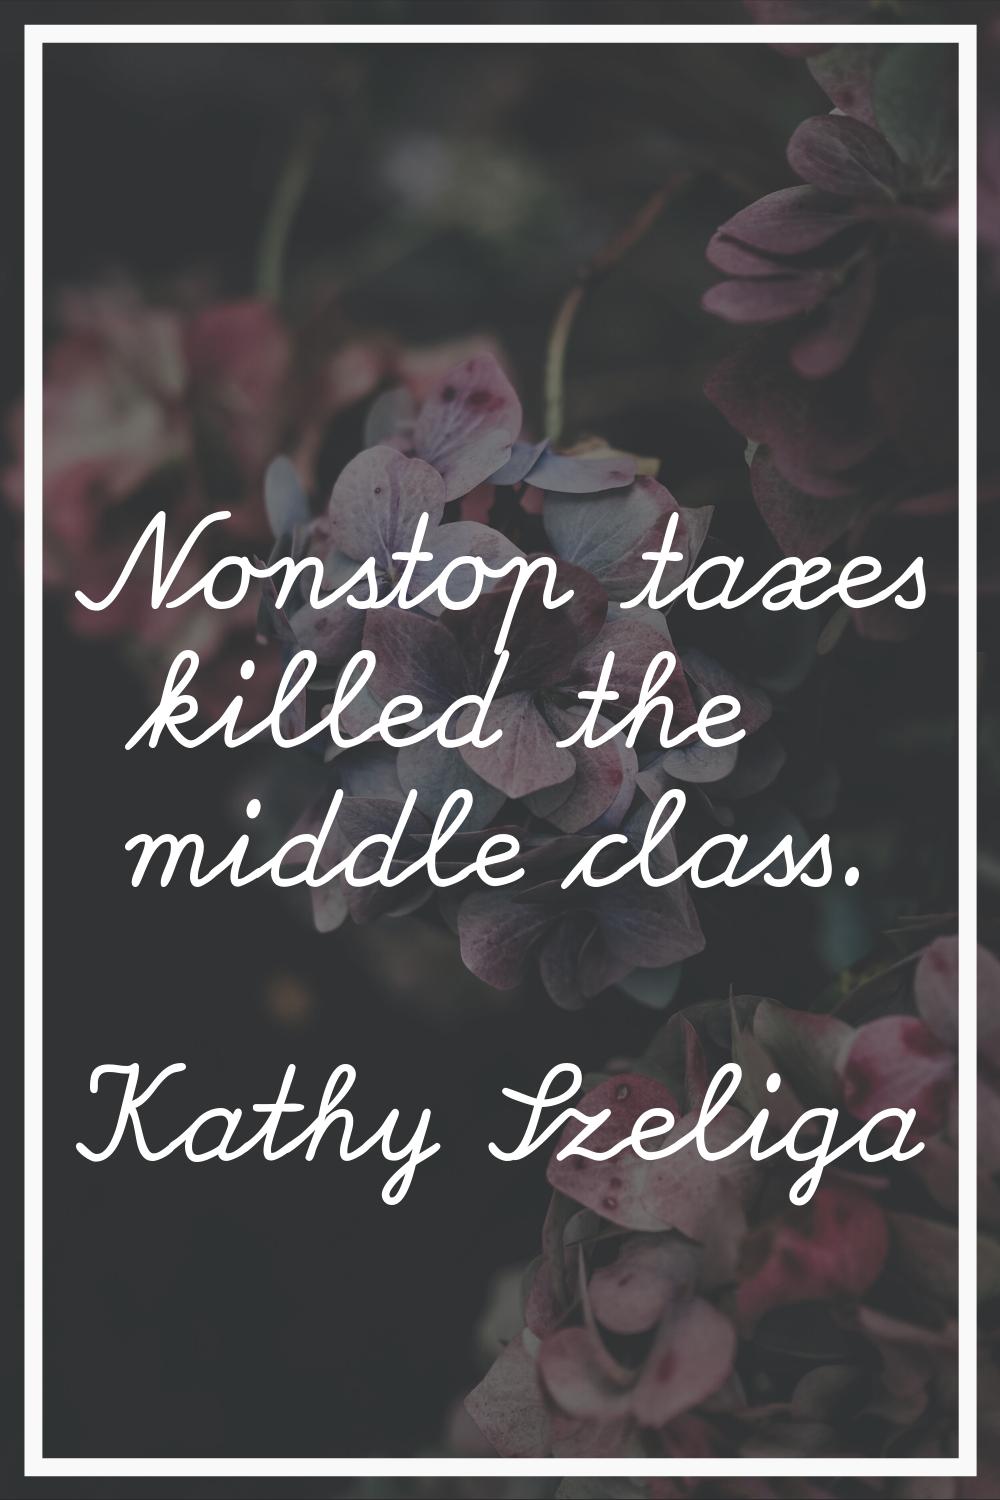 Nonstop taxes killed the middle class.